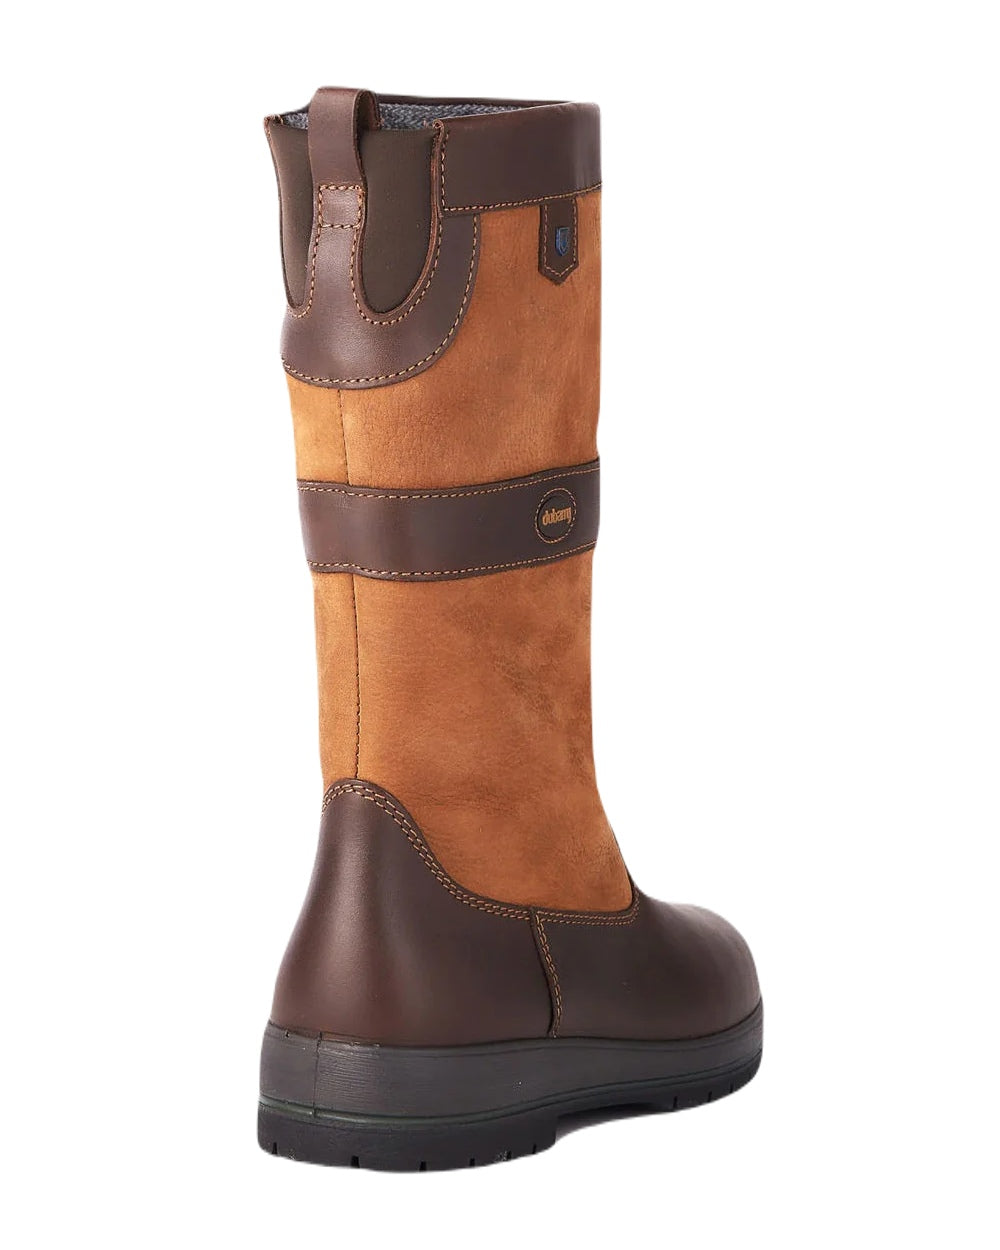 Dubarry Kildare Country Boots in Brown 